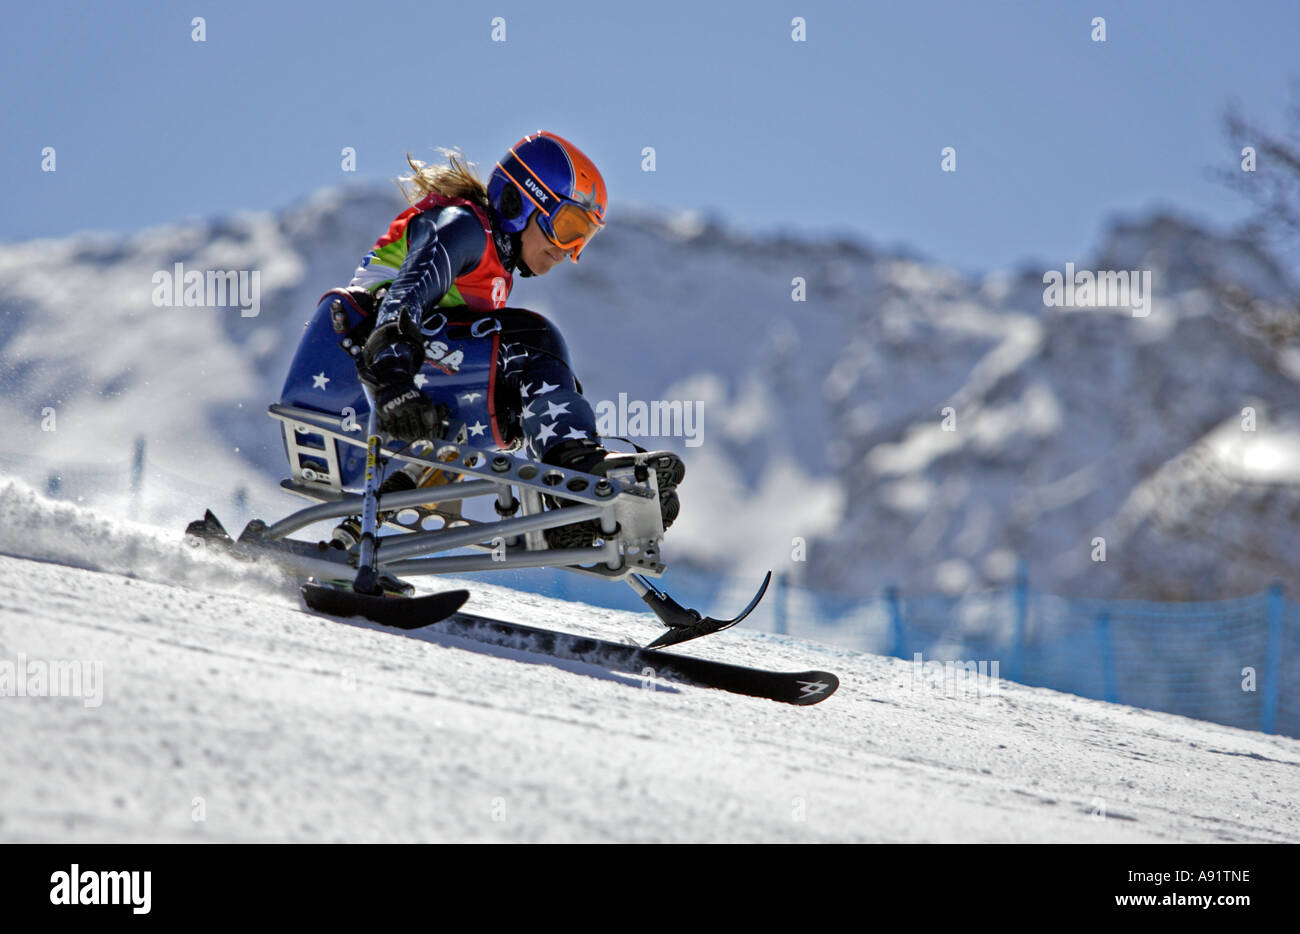 Lacey Heward LW12 2 of the USA in the Womens Alpine Skiing Super G Sitting competition Stock Photo